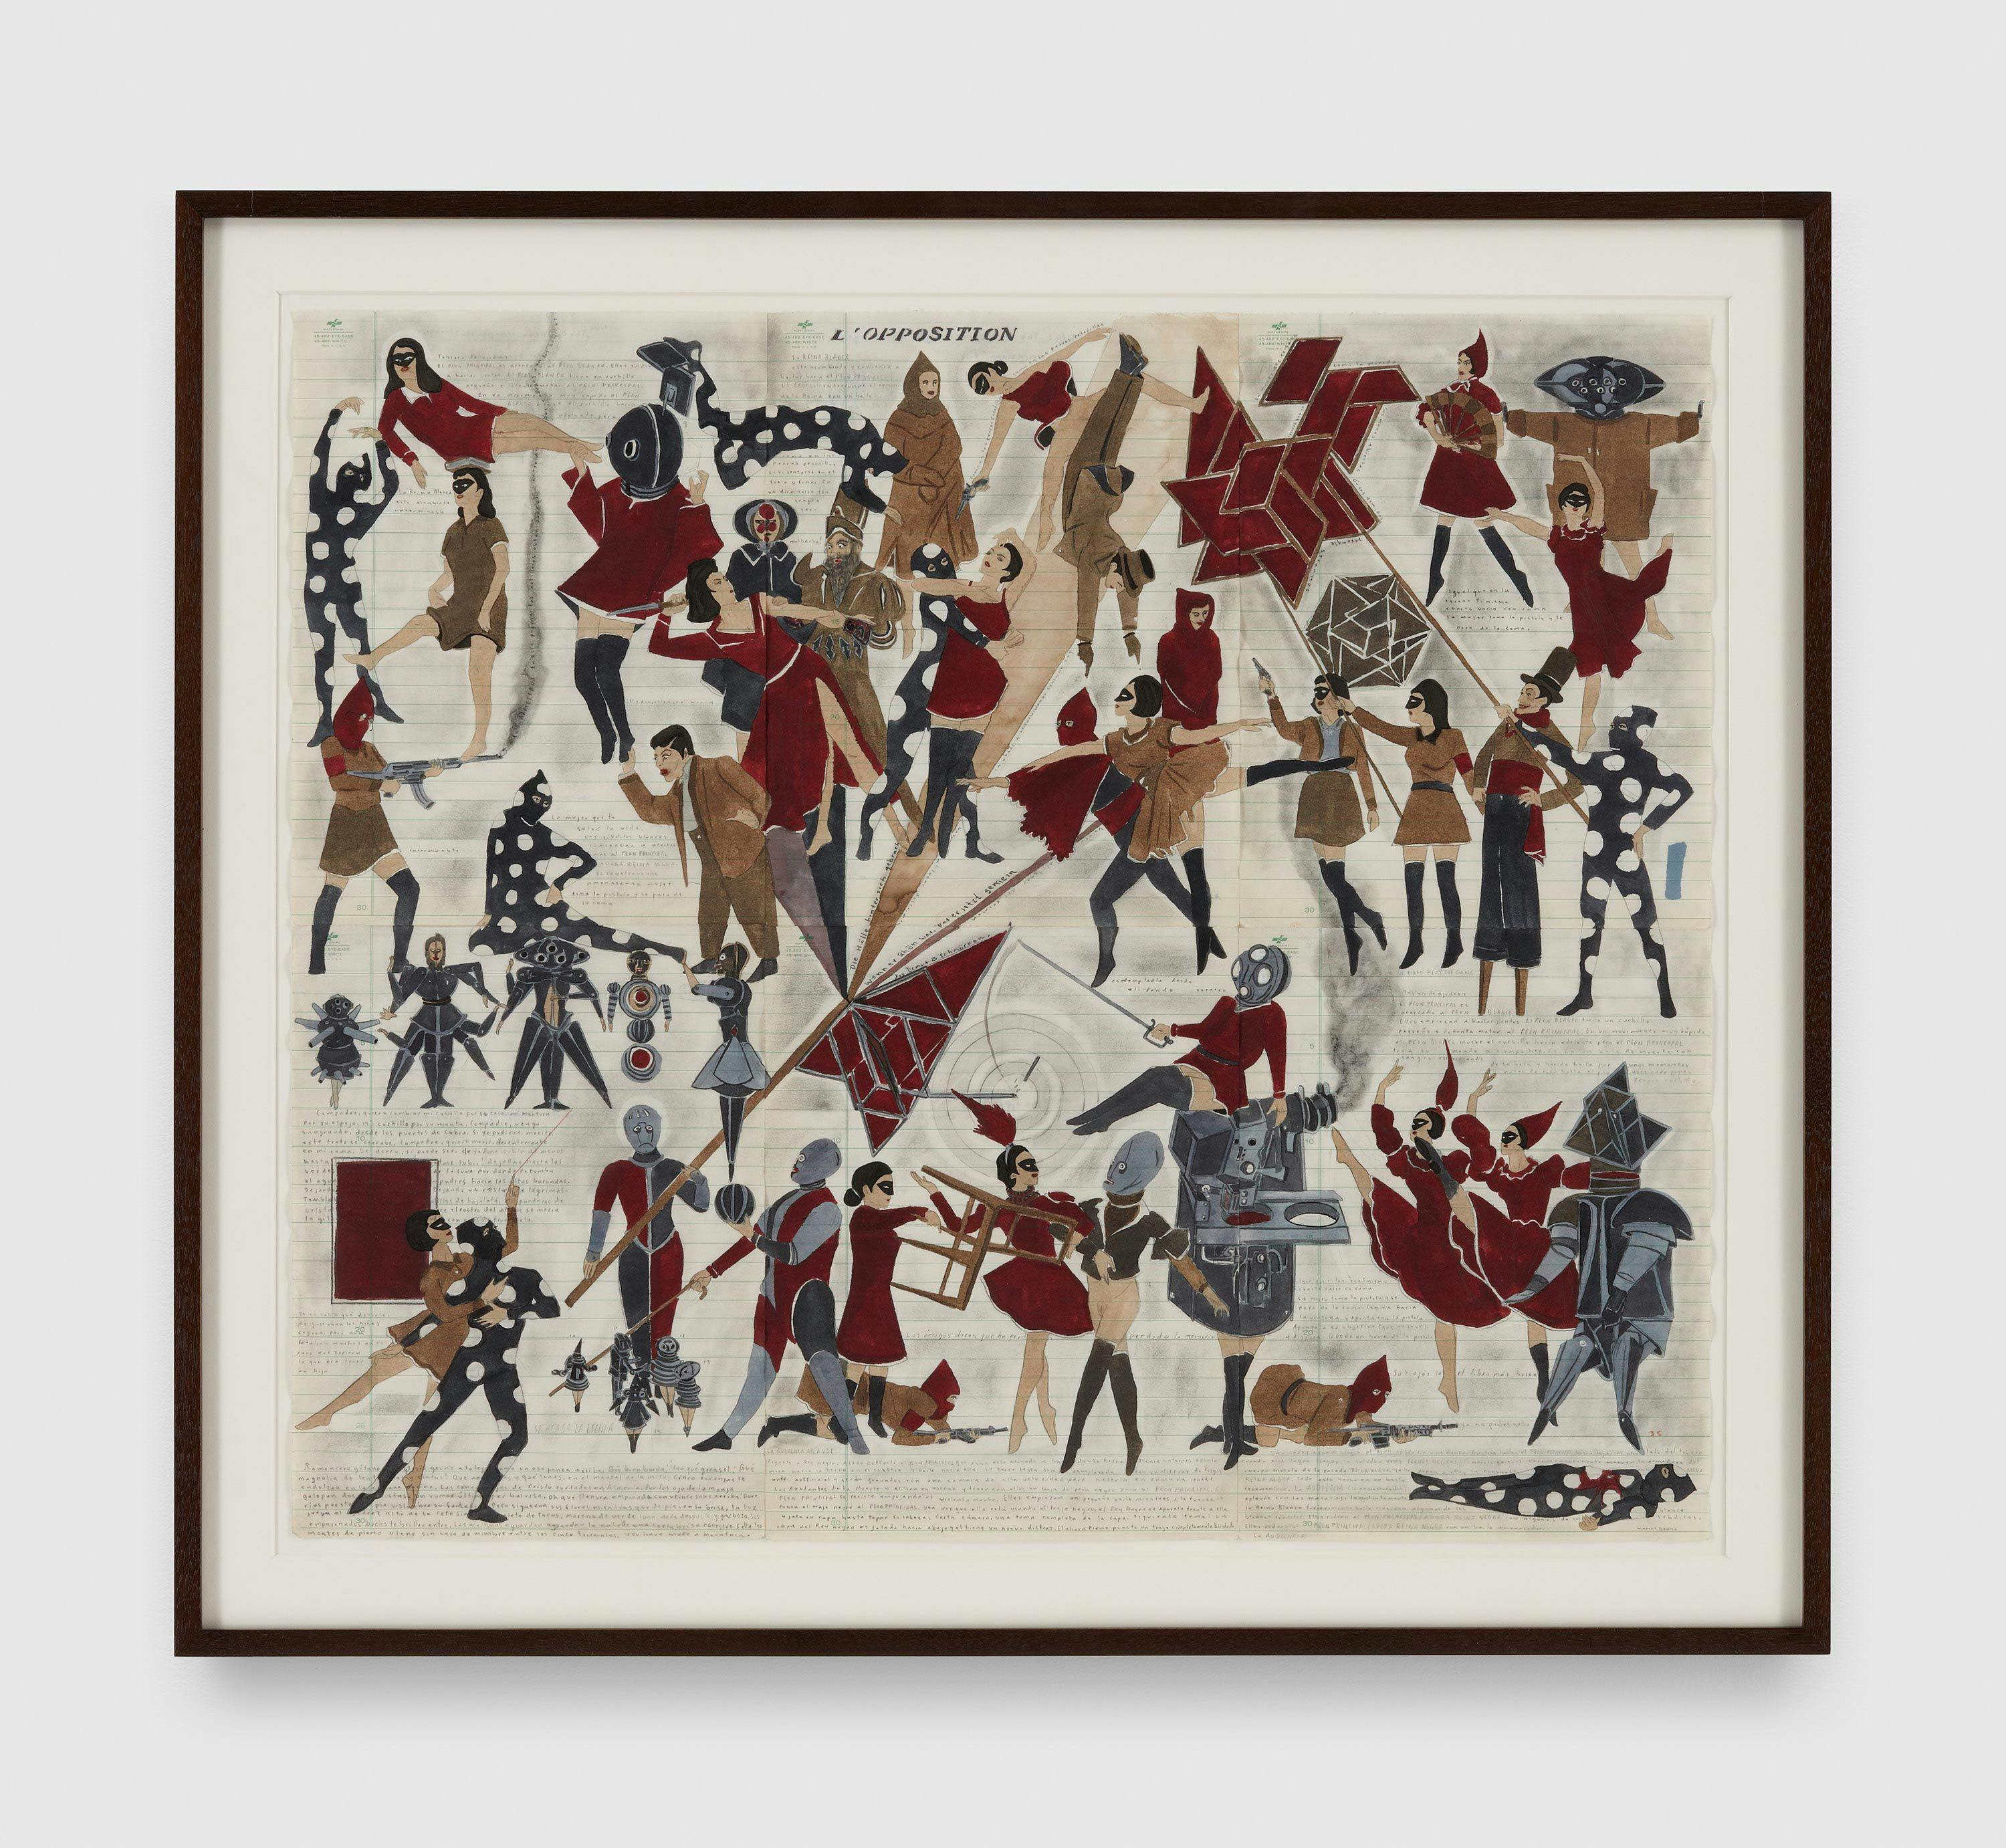 A work on paper by Marcel Dzama, titled The Opposition Strangles its Strangers, dated 2010.